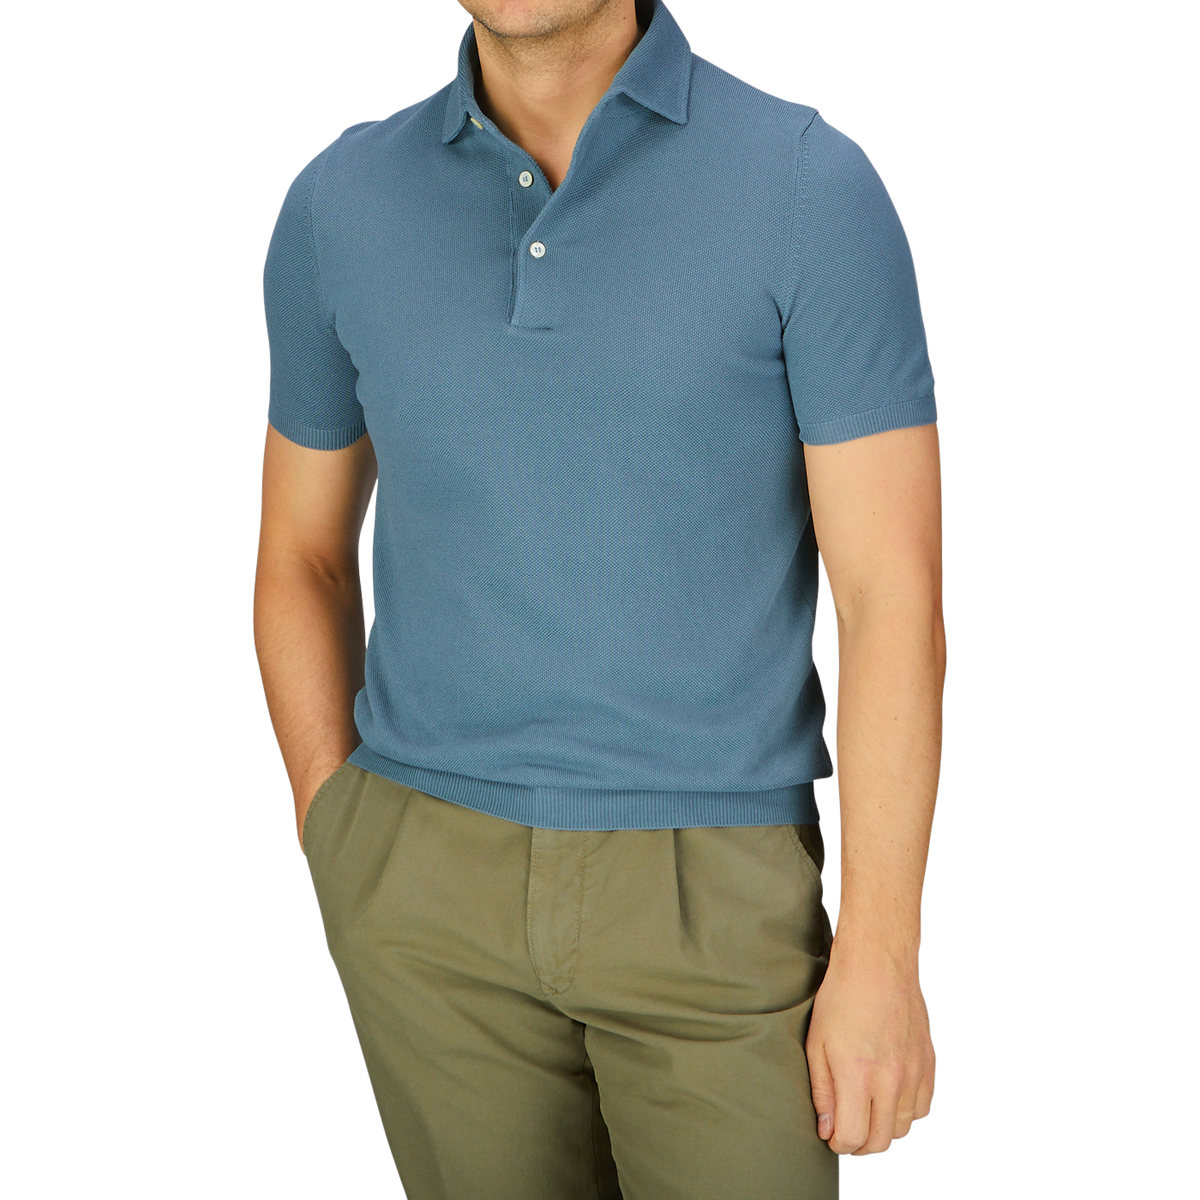 Man wearing a Turquoise Fresh Cotton Mesh Gran Sasso polo shirt and olive green trousers.